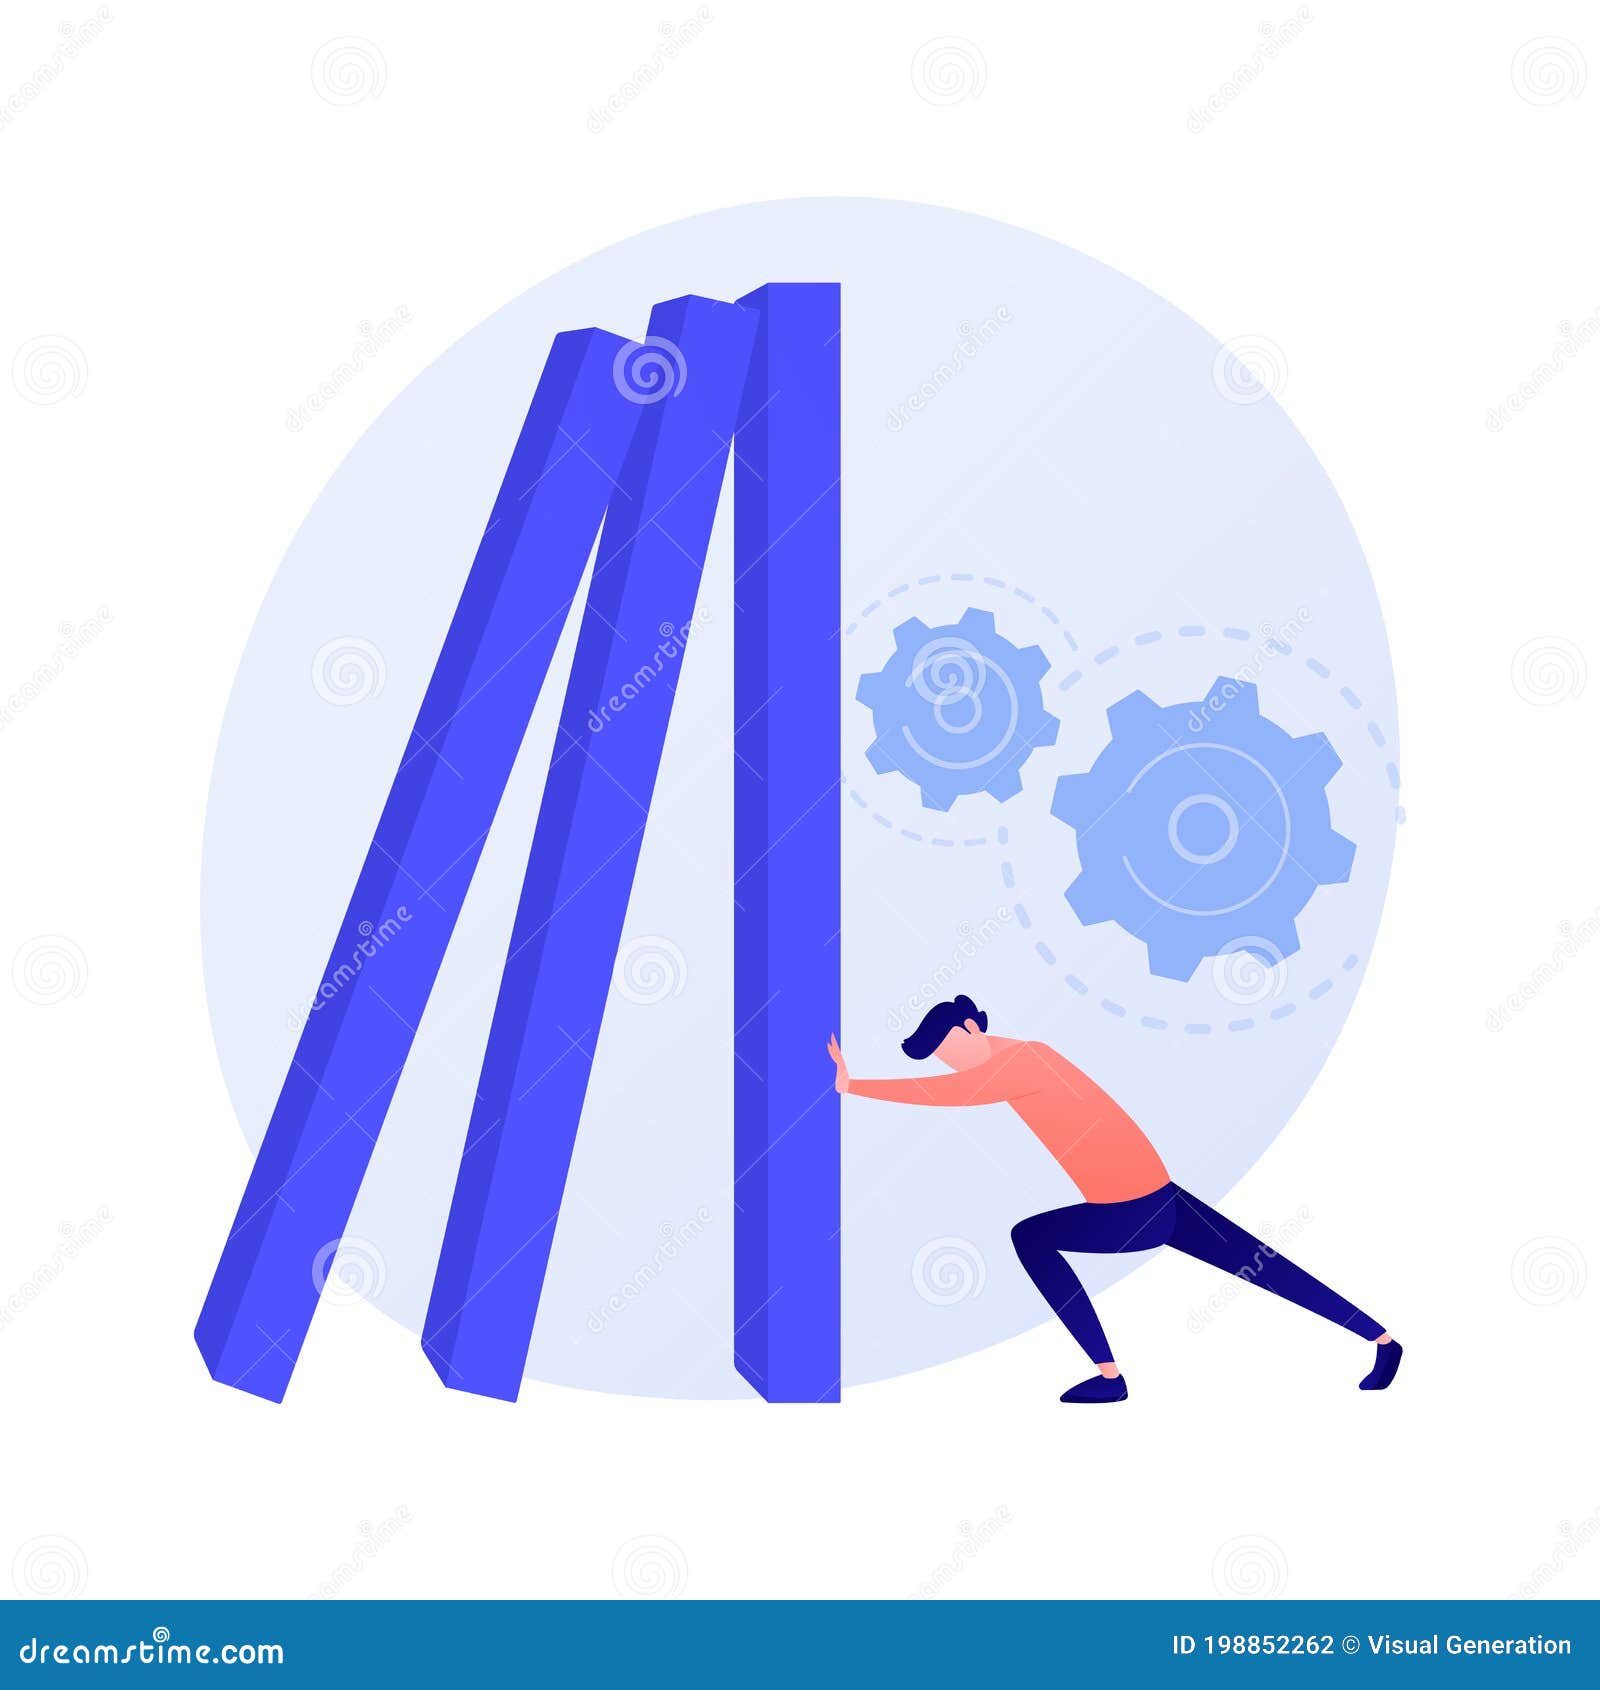 Resilience Abstract Concept Vector Illustration. Stock Vector ...